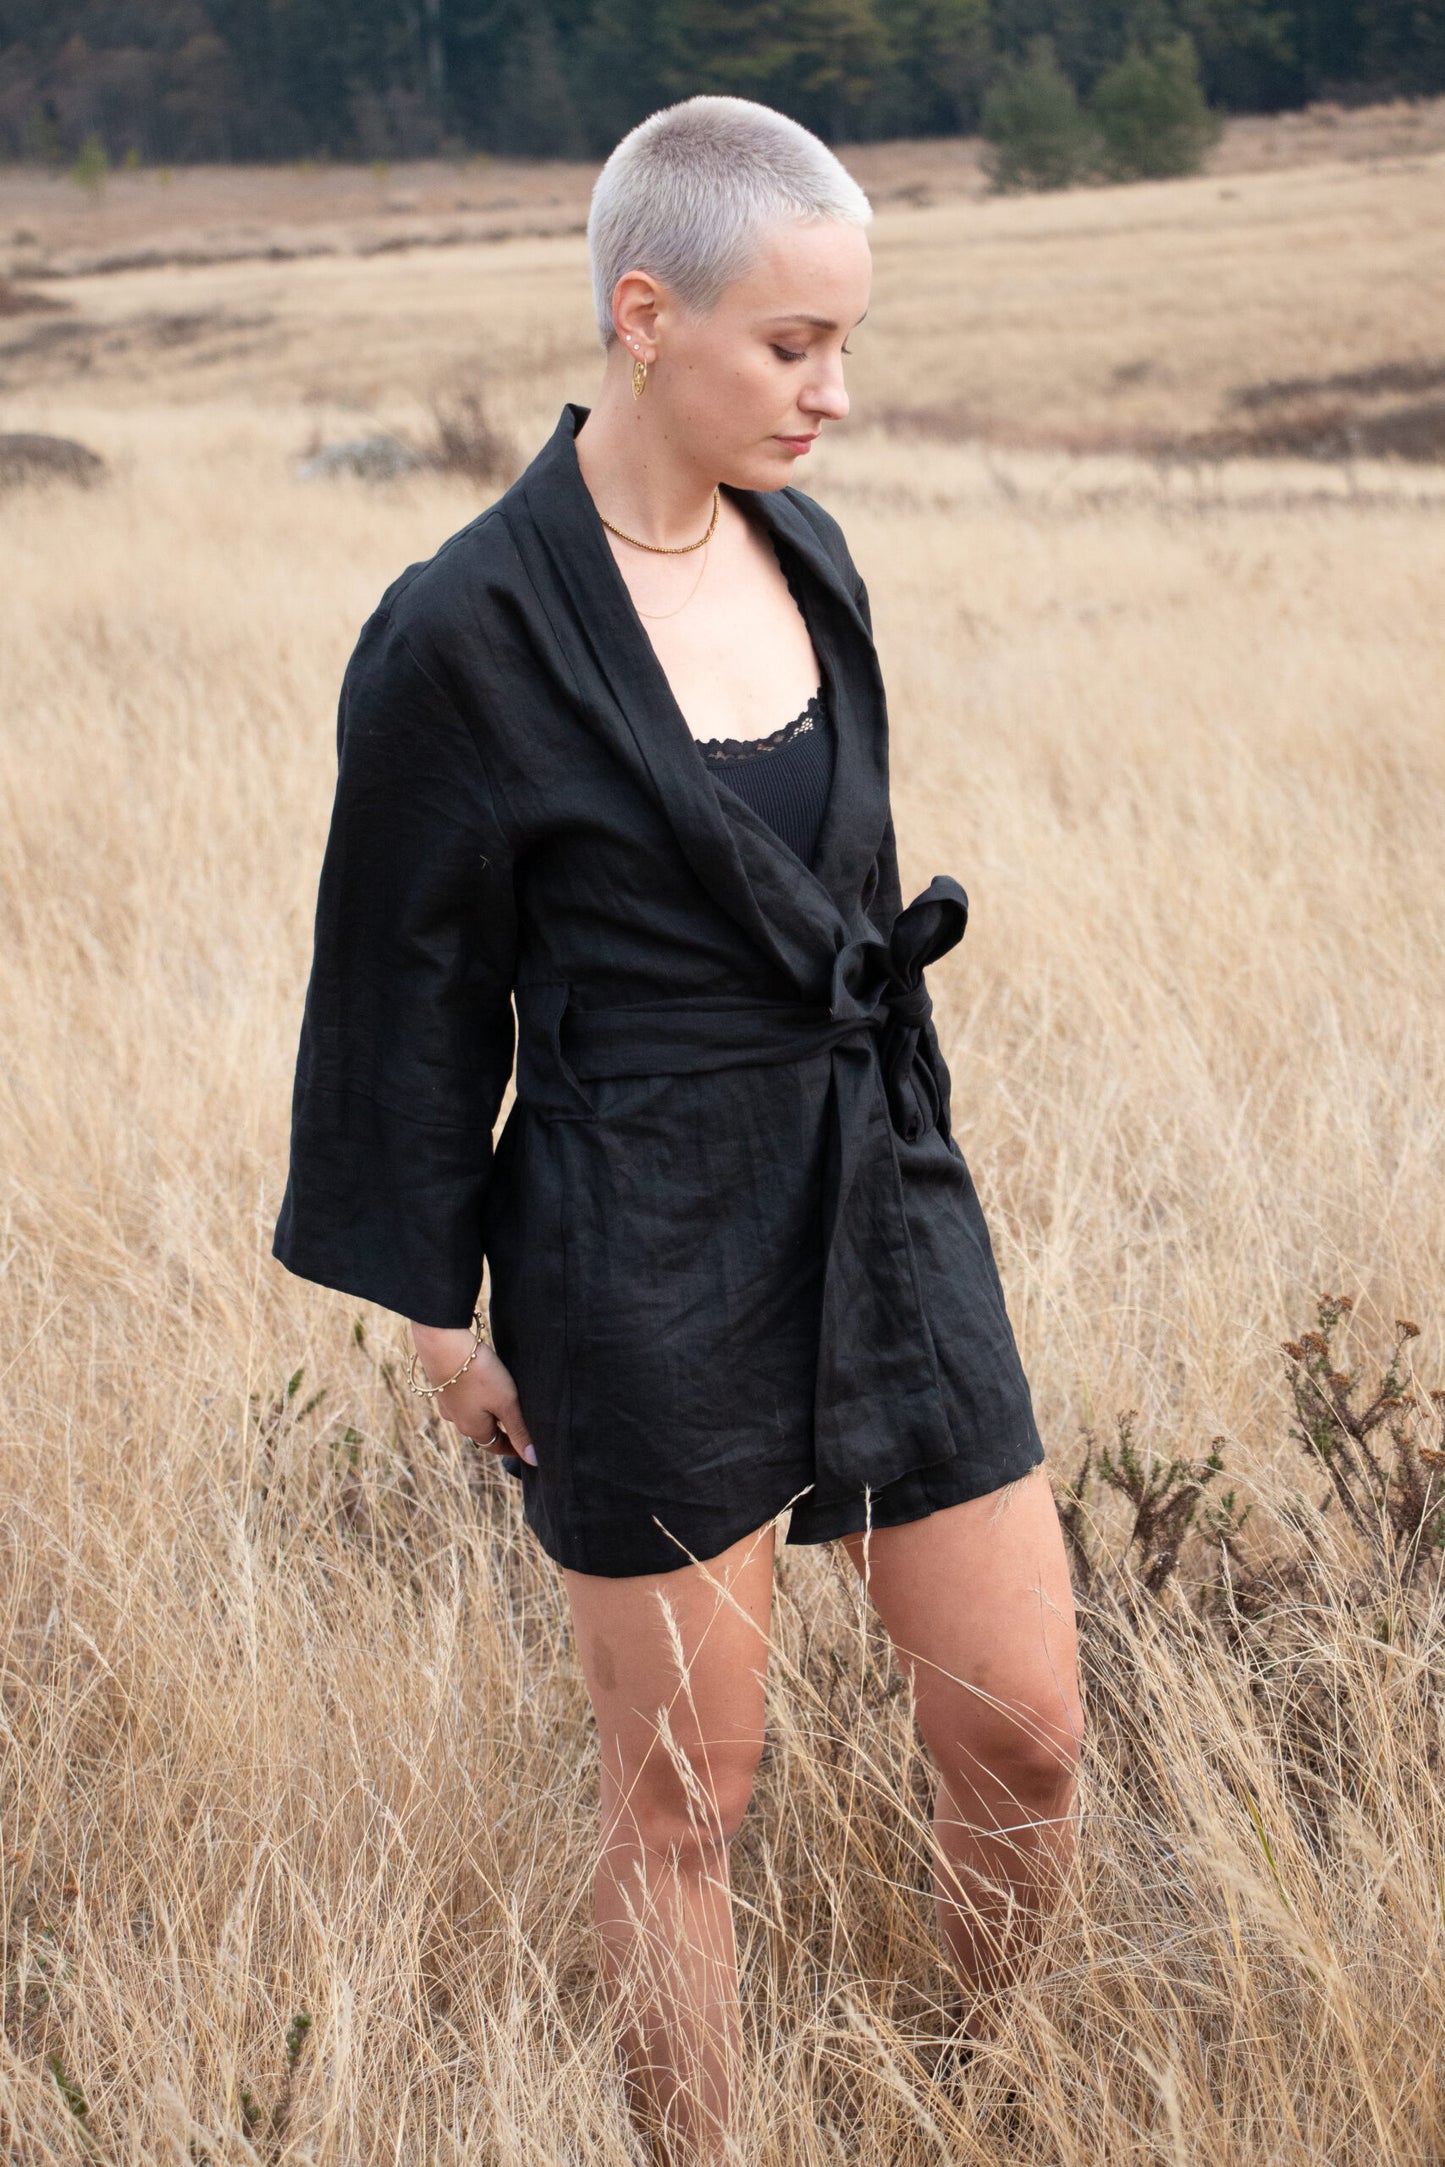 Standing in a field of long brown grass, a stylish and refined women wears a black kimono made of high quality linen fabric. The kimono she wears is designed and manufactured in South Africa.